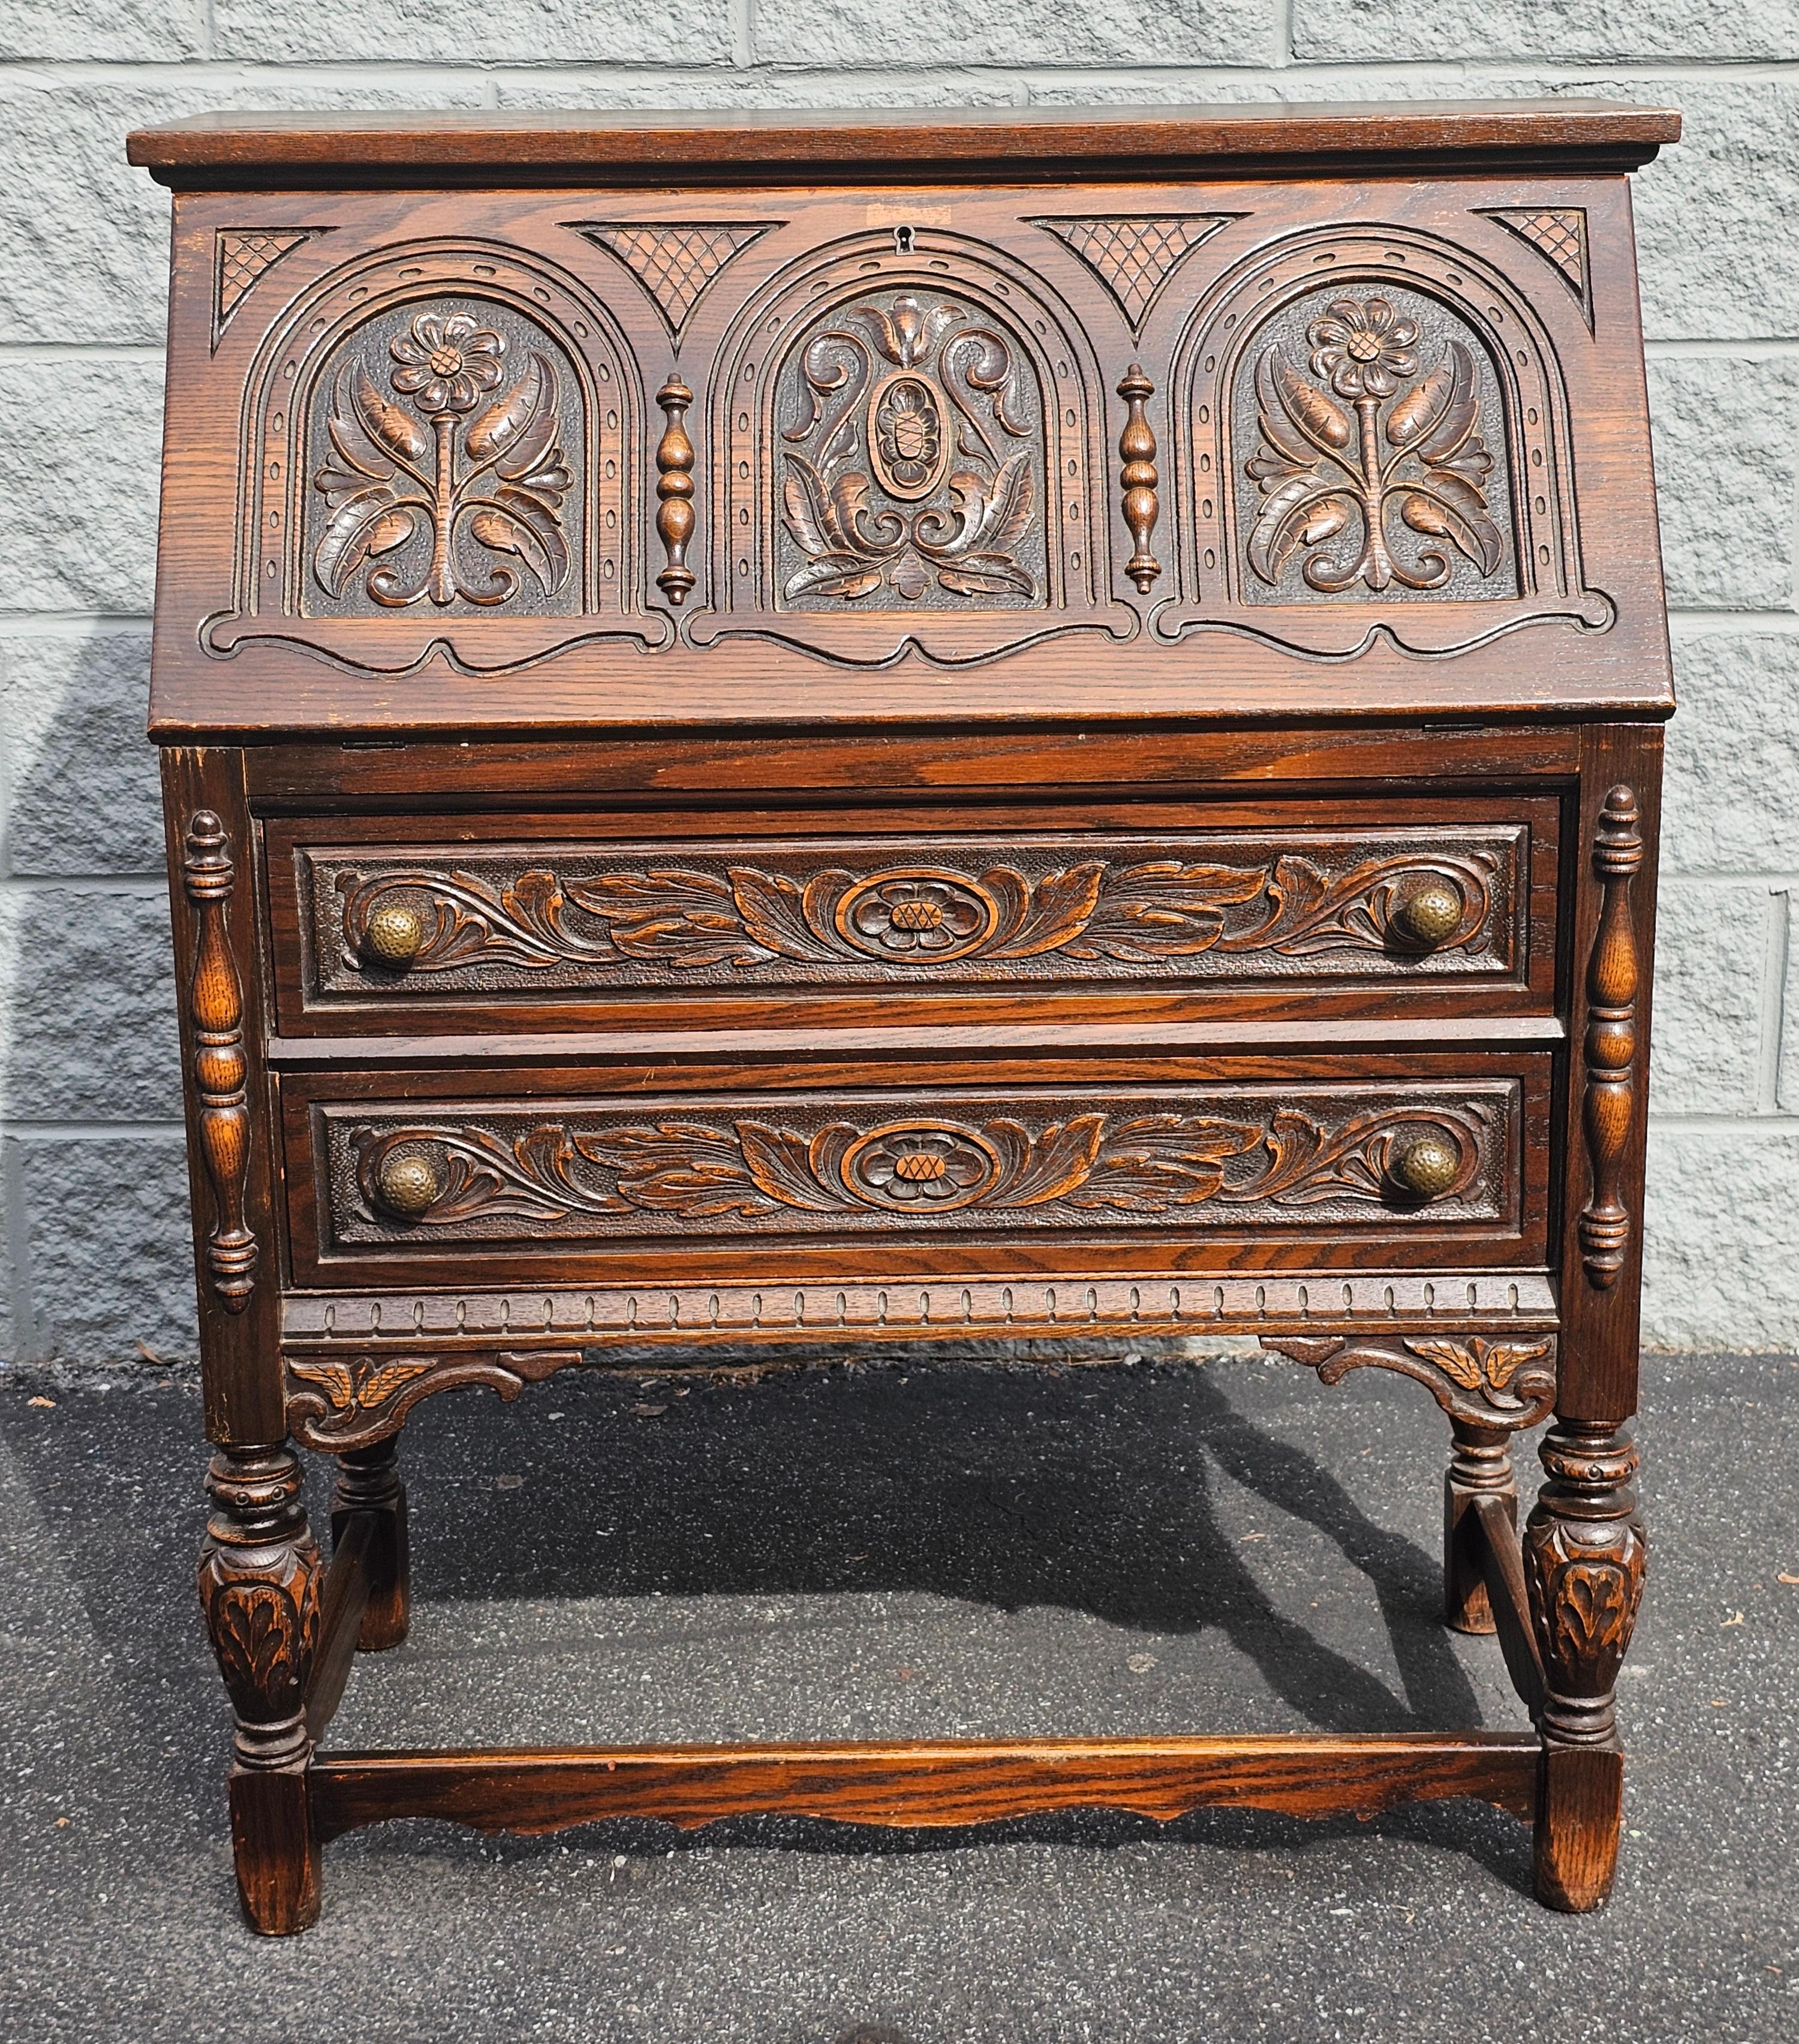 A Jacobean-style slant front Hancrafted and handcarved by the renowned Rockford Chair and Furniture Company. Founded in 1876 by Swedish settlers, the company has a rich heritage of fine craftsmanship and timeless design.

This stunning slant front